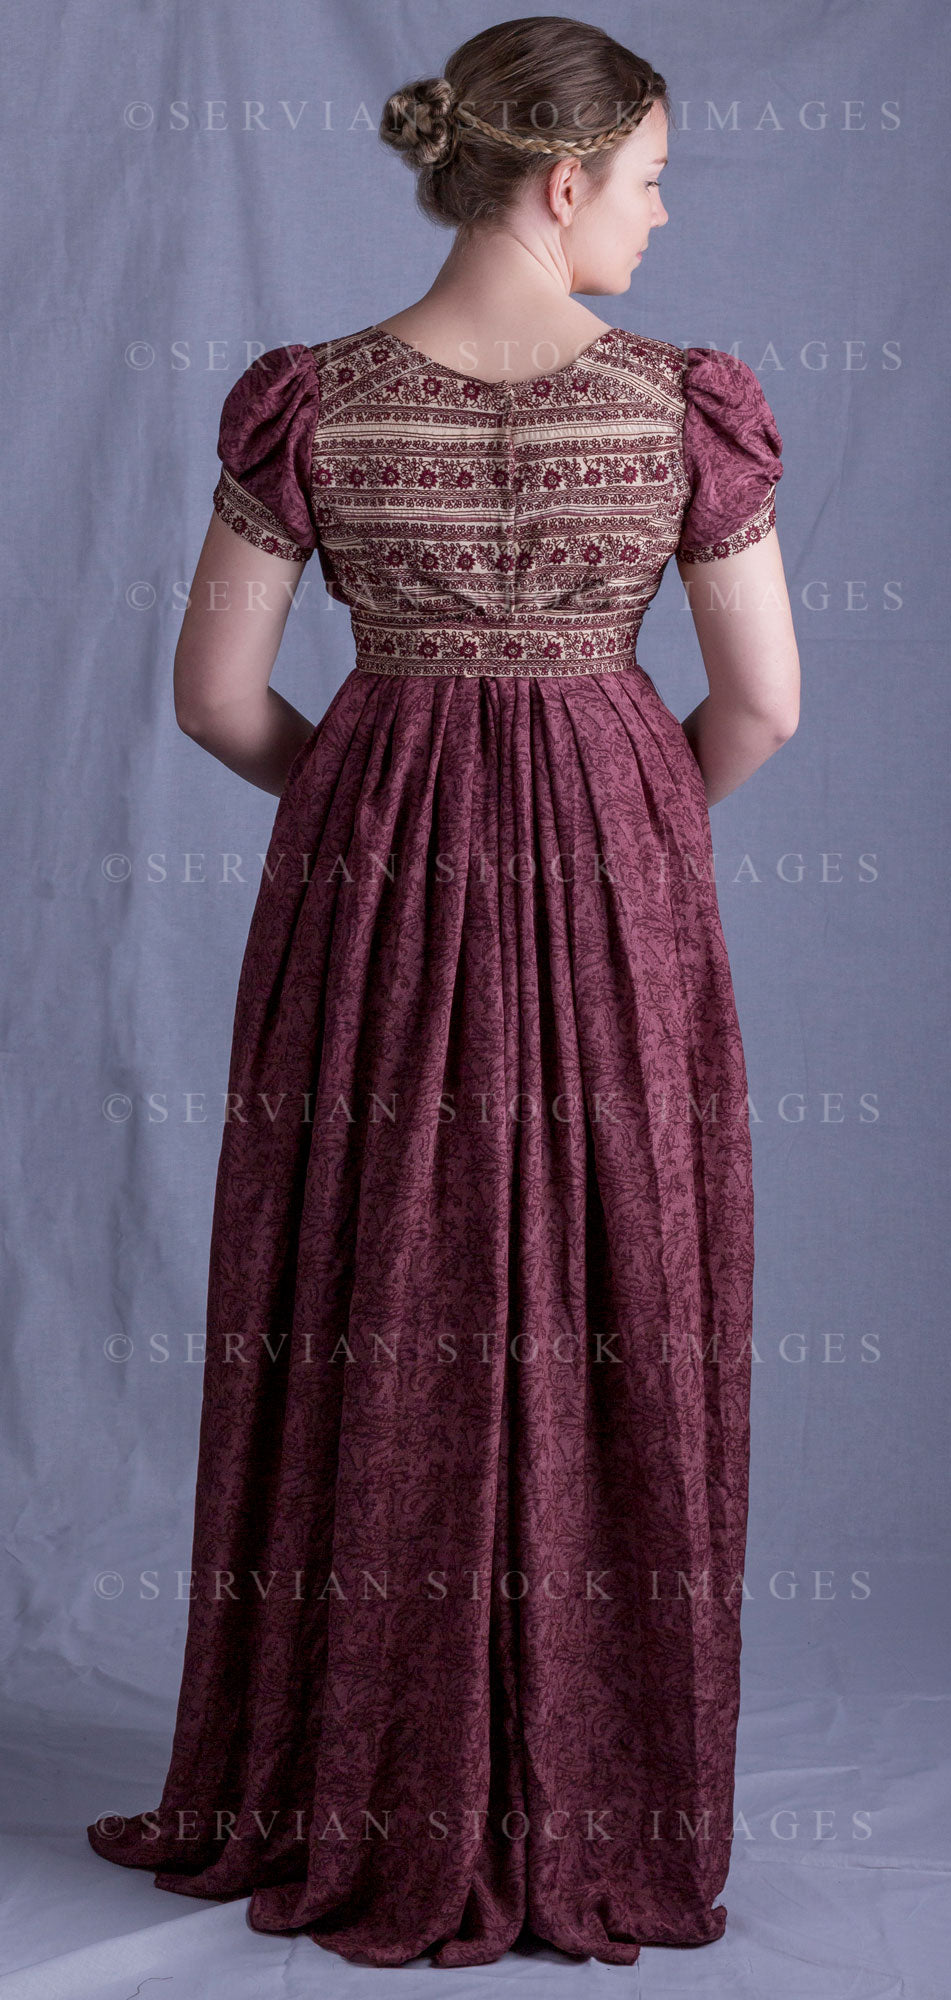 Regency woman in a red silk embroidered dress (Tayla 0367)